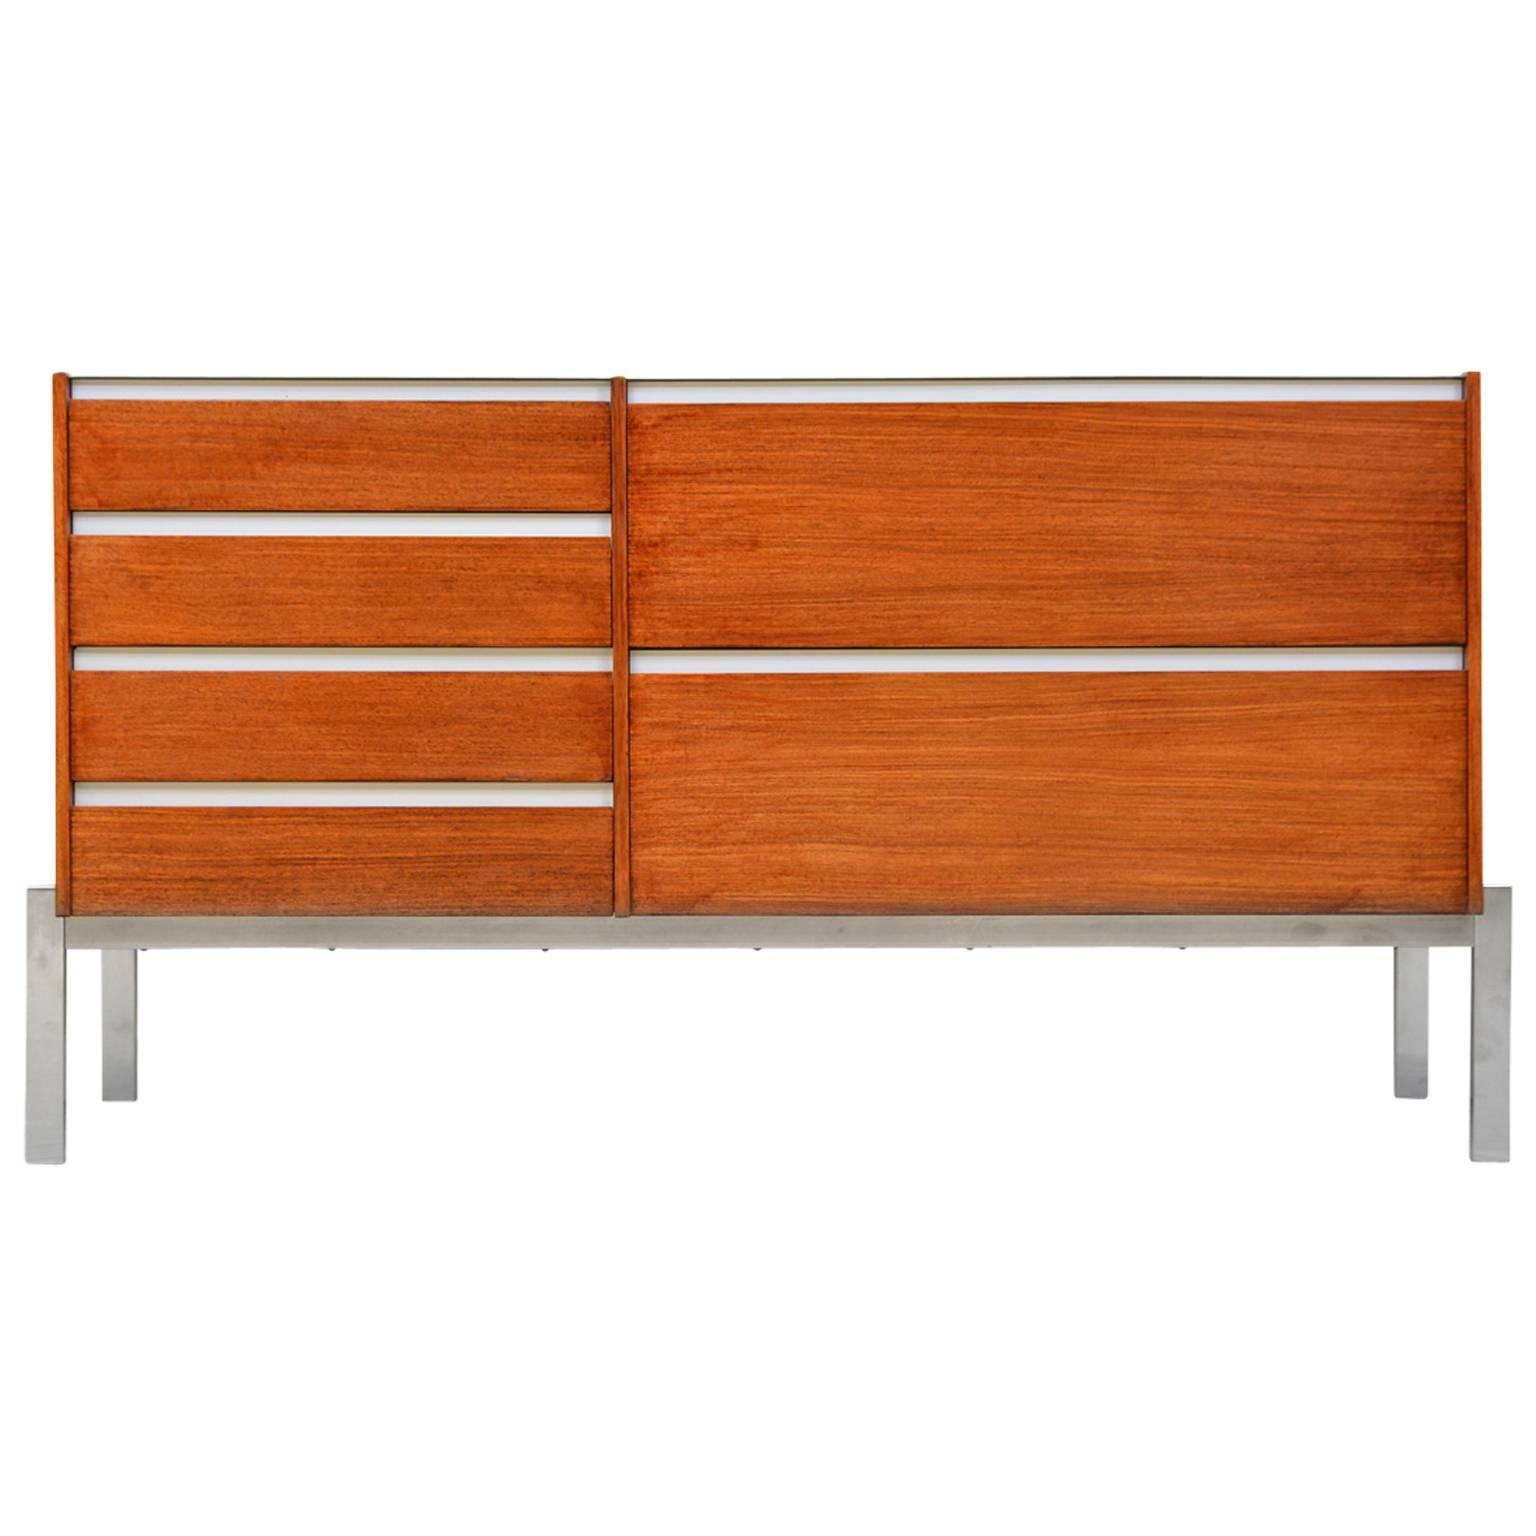 Rosewood Sideboard by Kho Liang Ie & Wim Crouwel for Fristho